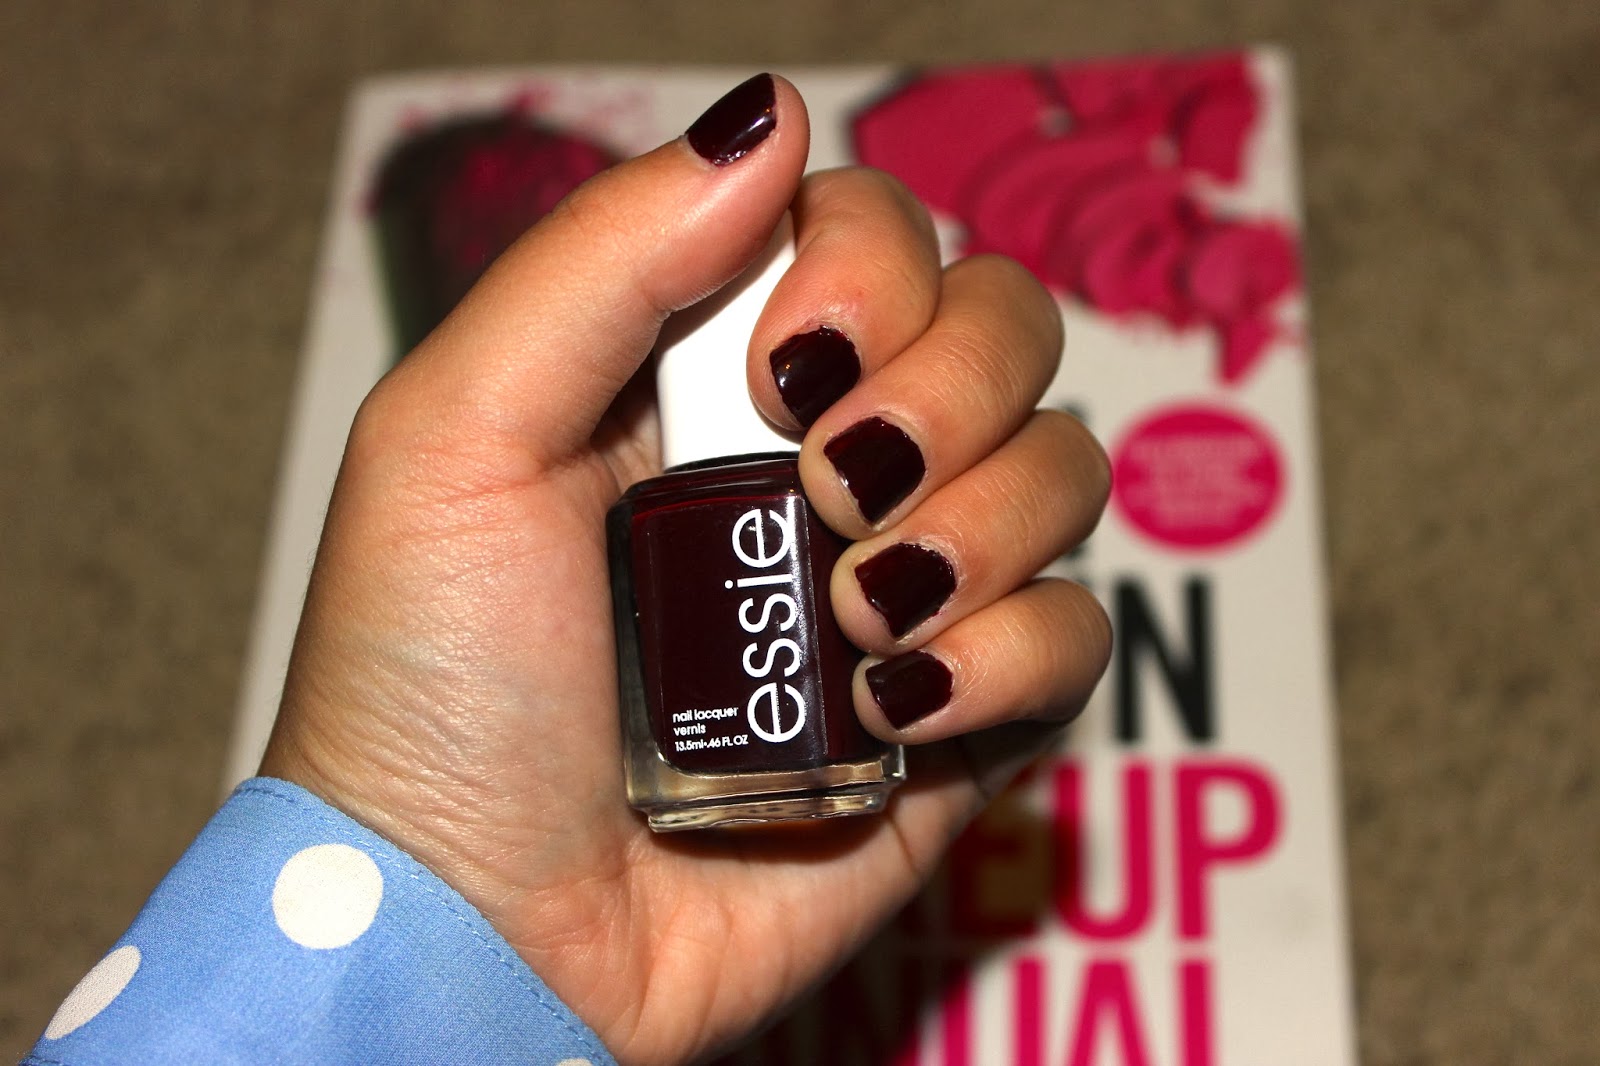 2. Essie Nail Polish in "Berry Naughty" - wide 4